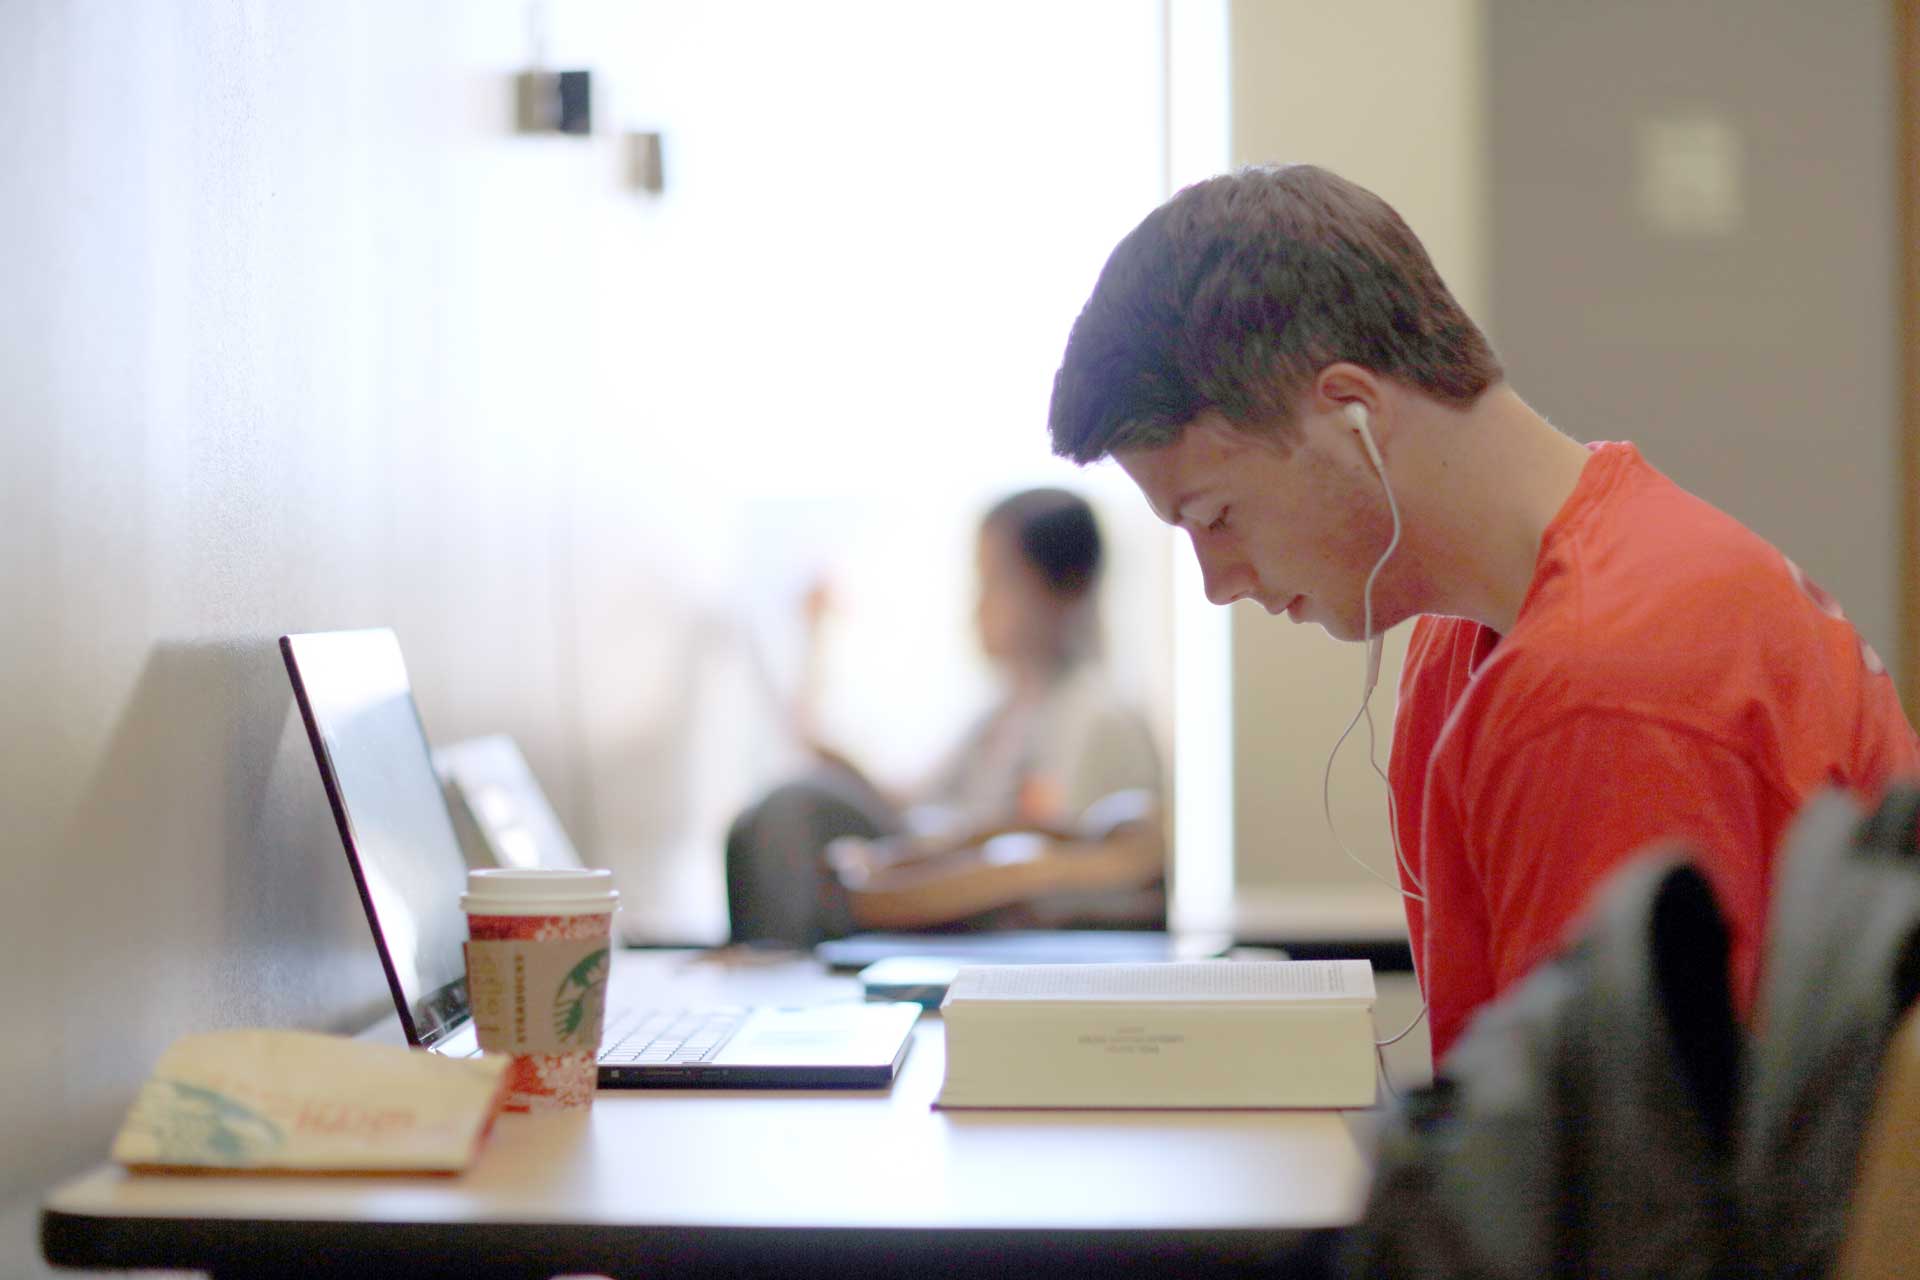 A student studies with a laptop